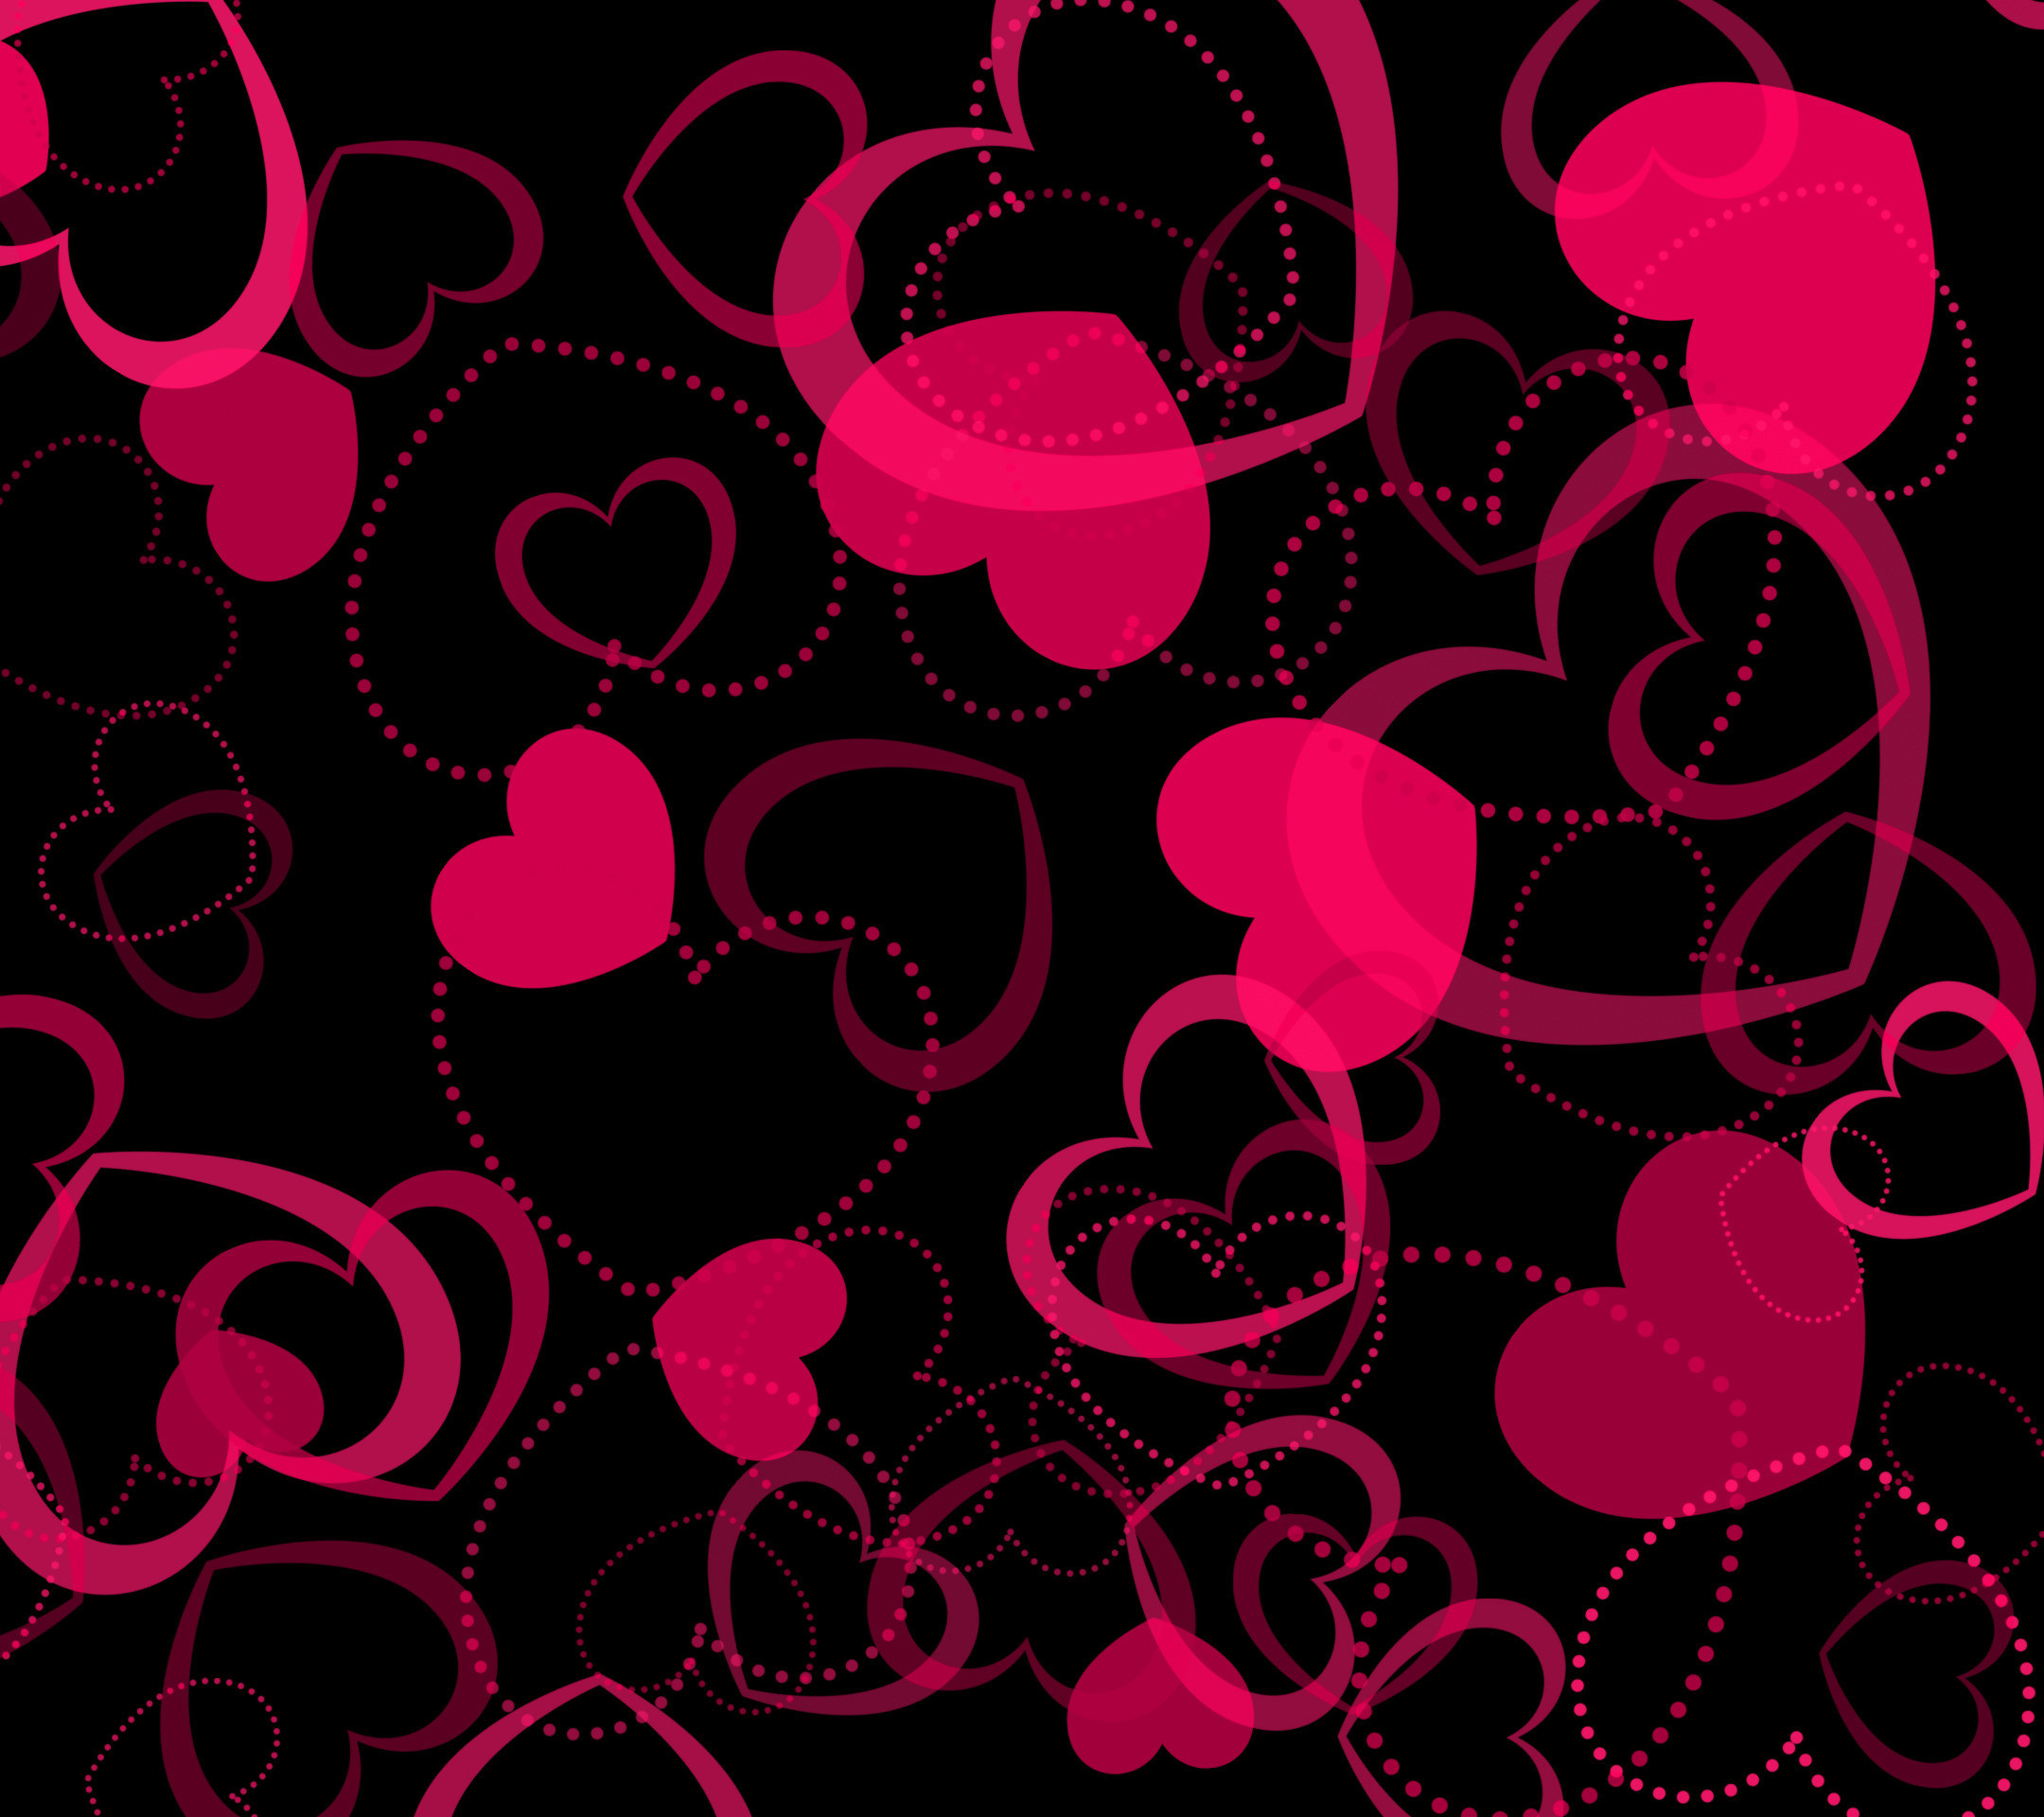 2160x1920 Only the best free pink hearts wallpapers you can find online! Pink hearts  wallpapers and background images for desktop, iPhone, Android and any  screen ...